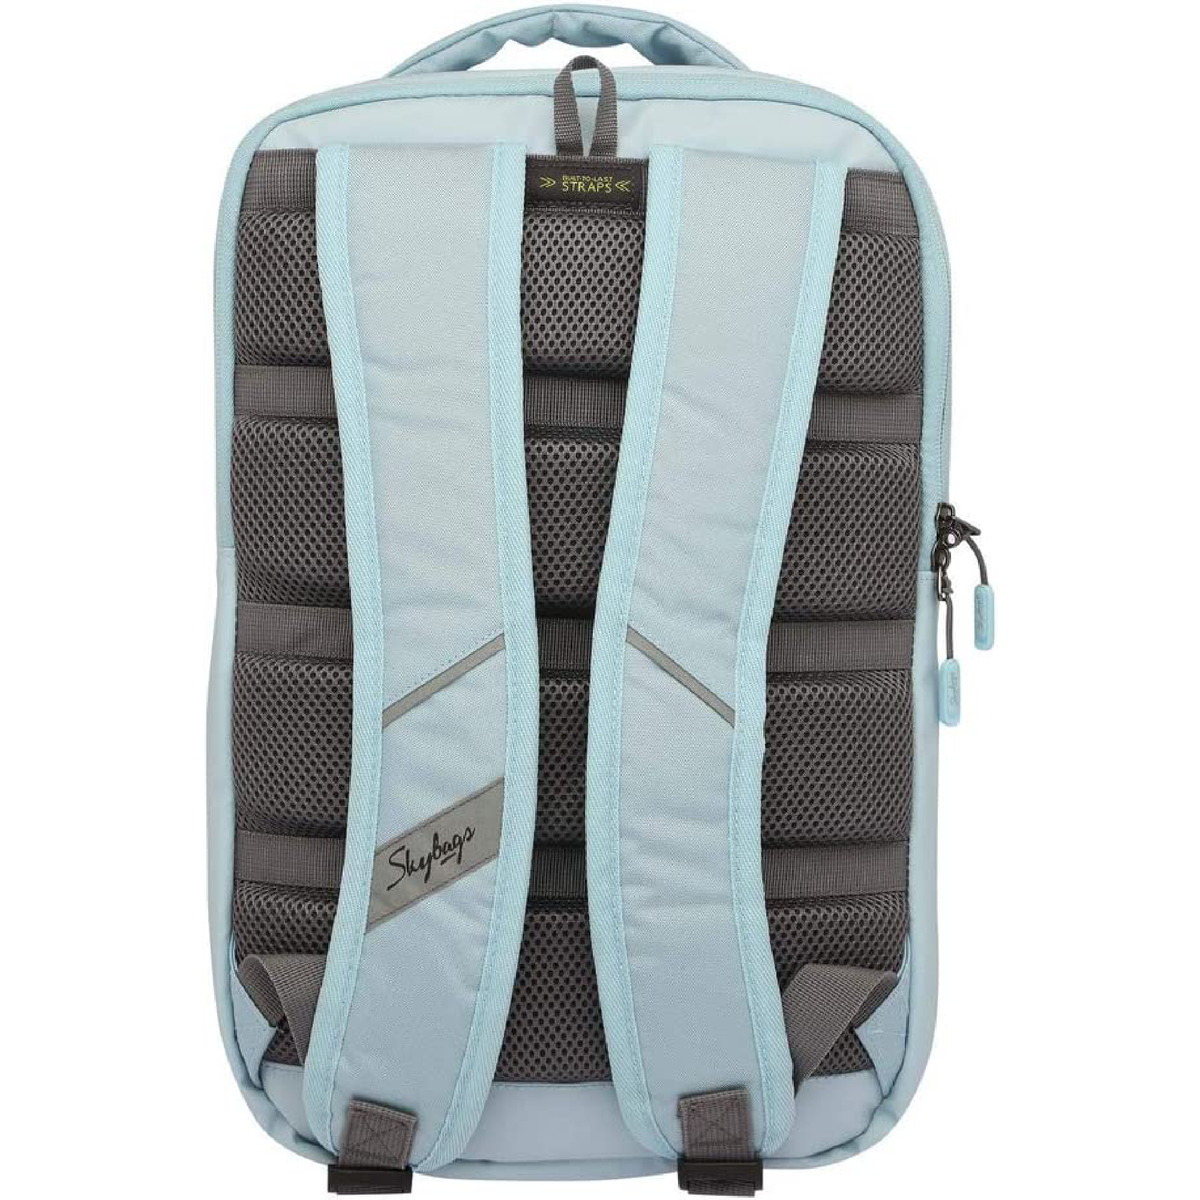 Skybags Unisex Polyester Laptop Bagpack, 18 inches, Blue, Aztek02